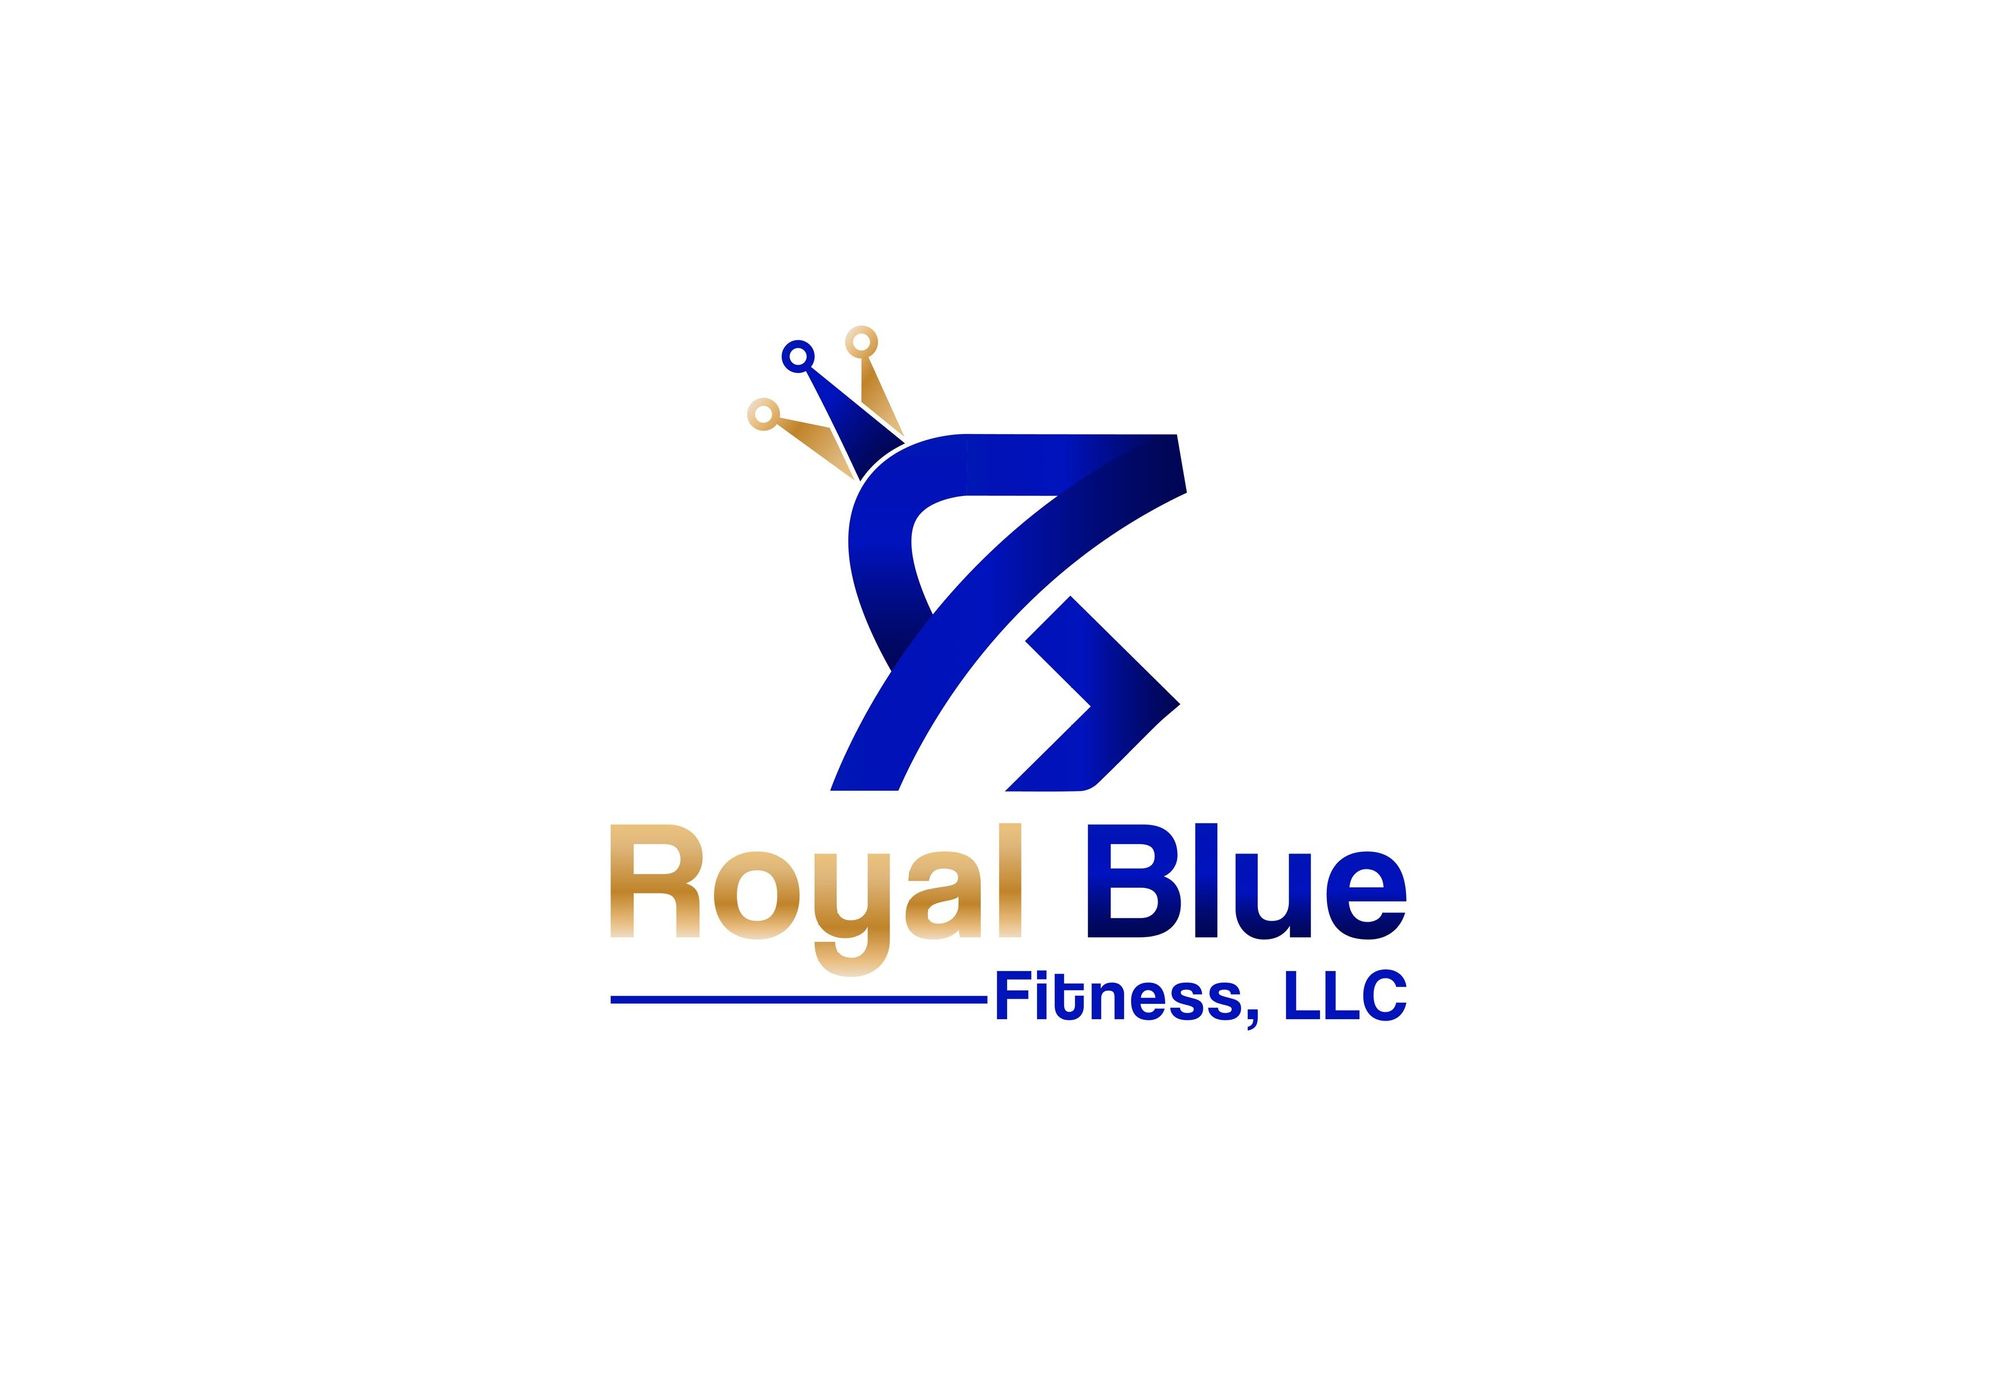 Live A Happier, Healthier Life! - Royal Blue Fitness